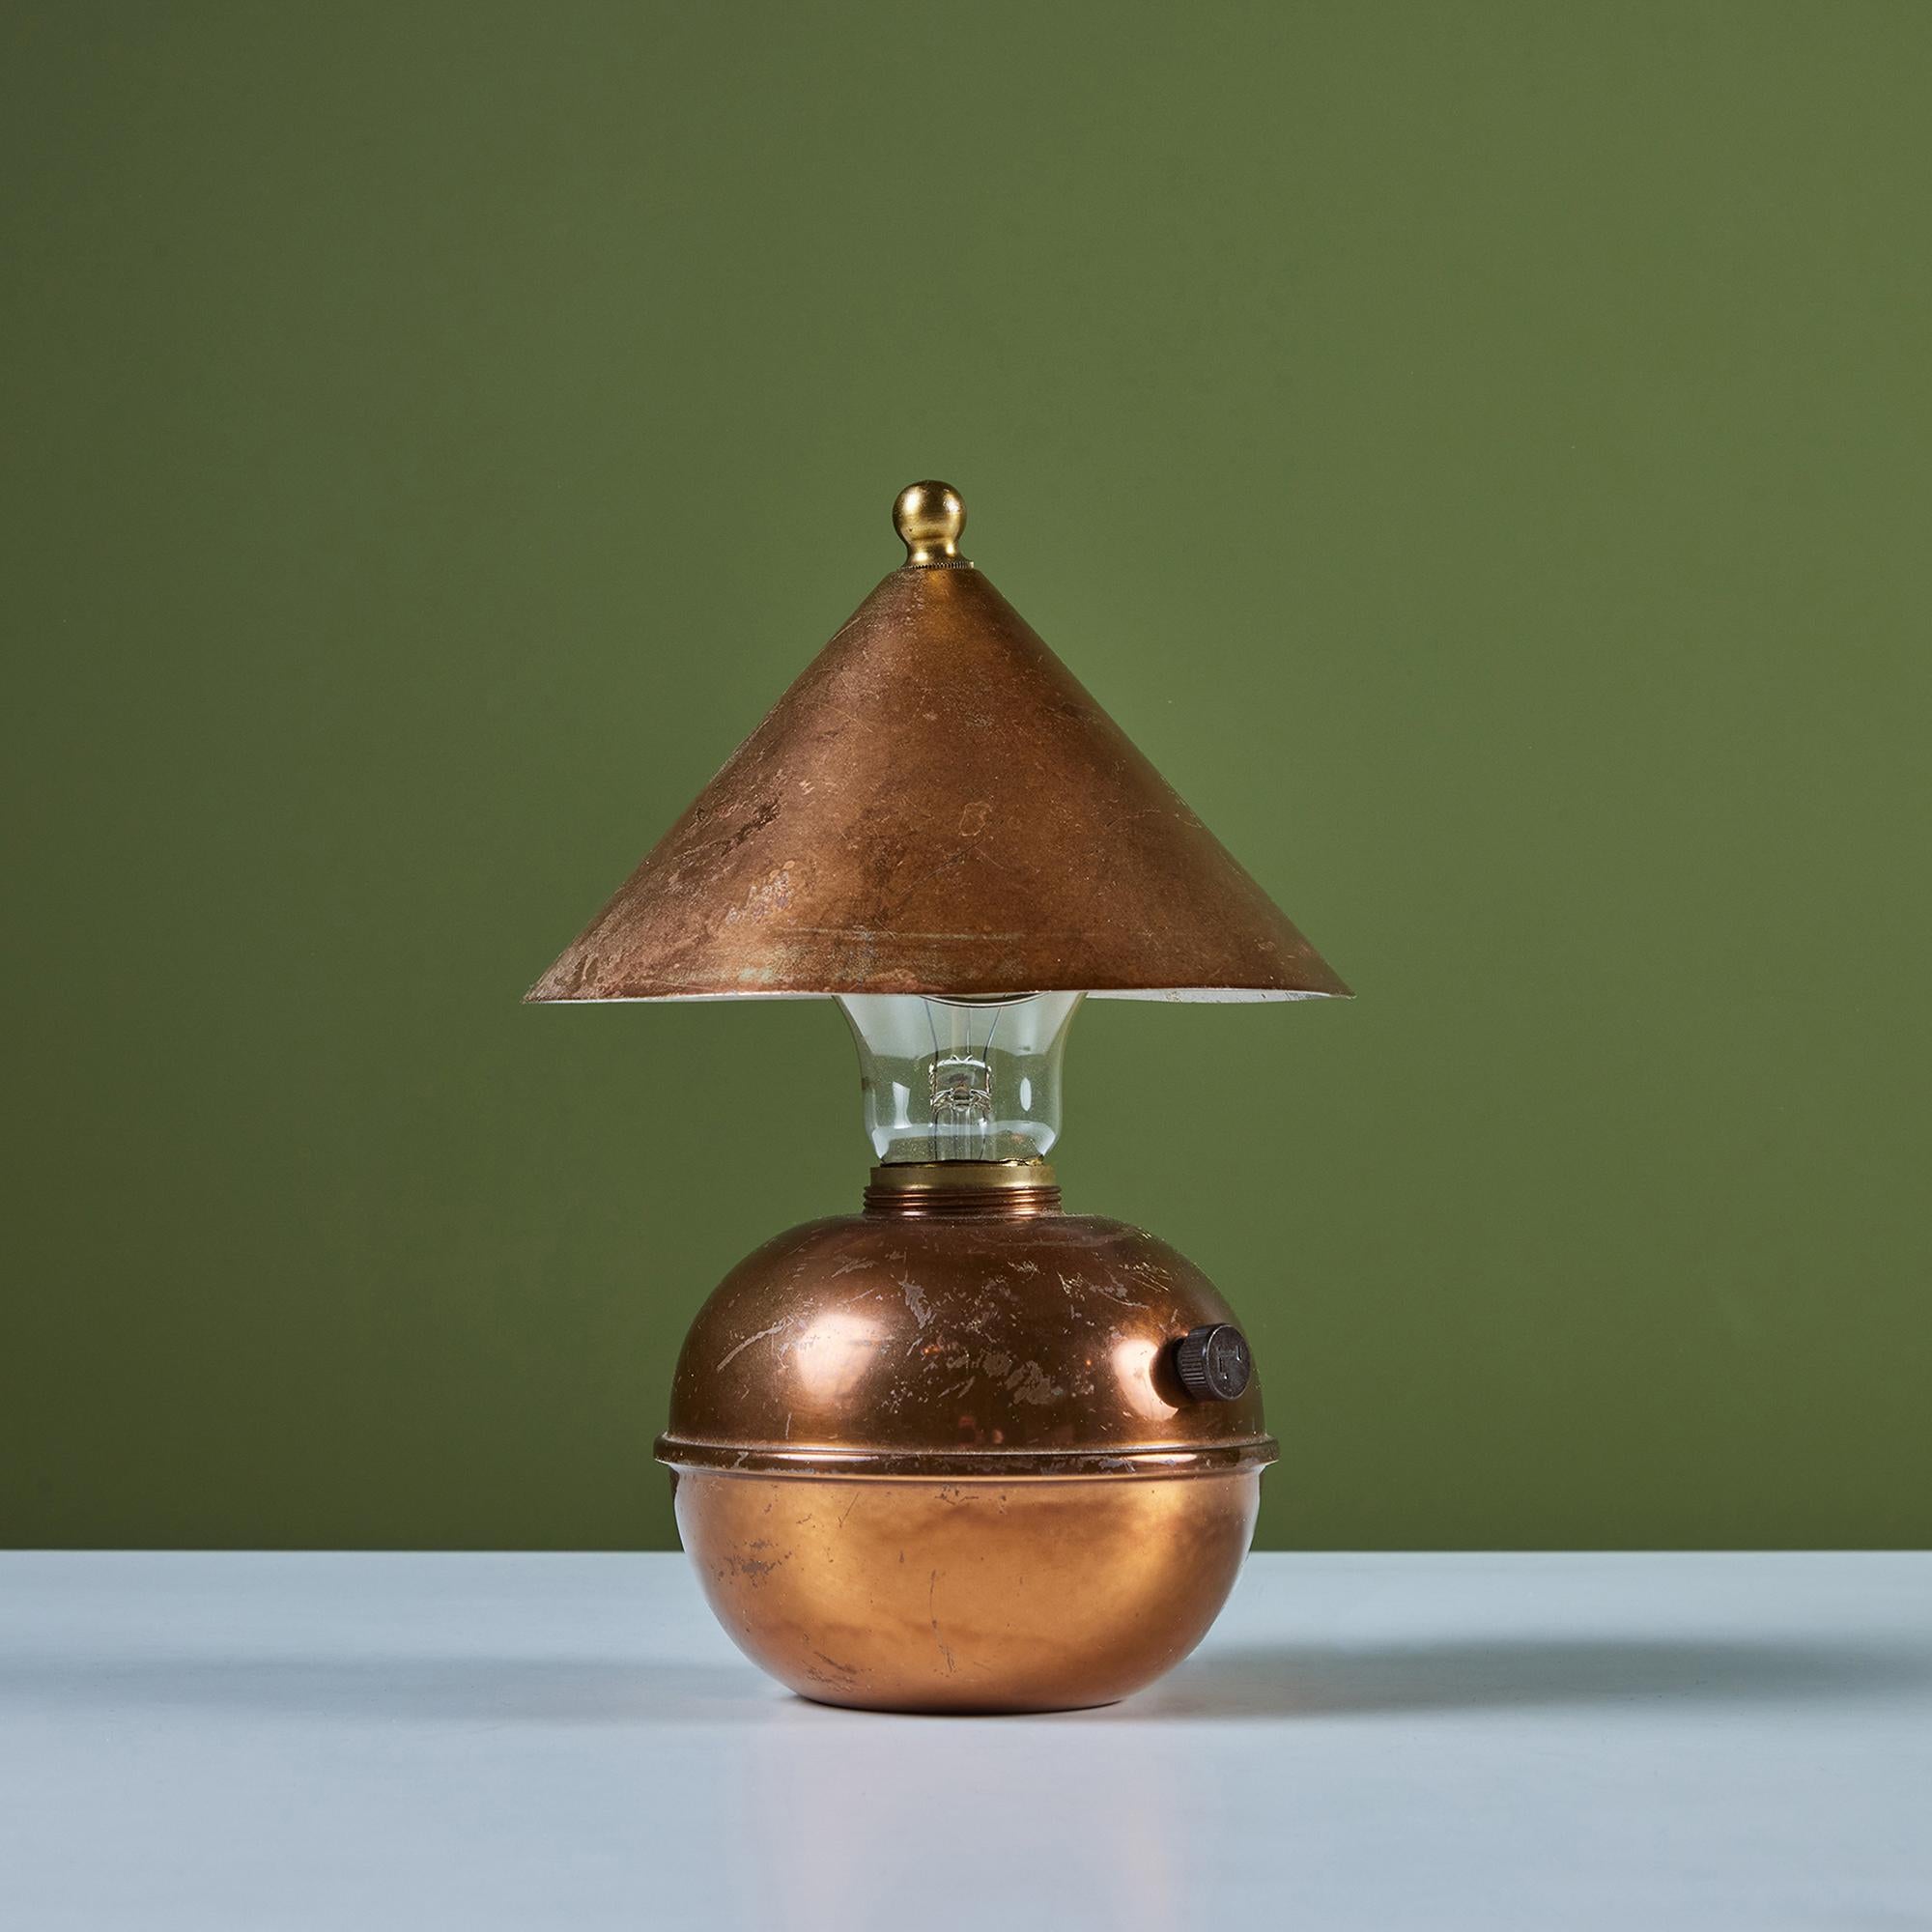 Petite copper table lamp by Ruth Gerth for Chase, c.1930s, USA. The Art Deco lamp features a cone shaped shade and bulb body in patinated copper. The minimalist design is playful and a fun piece to add to a shelf or desk.  Impressed with [Chase] and